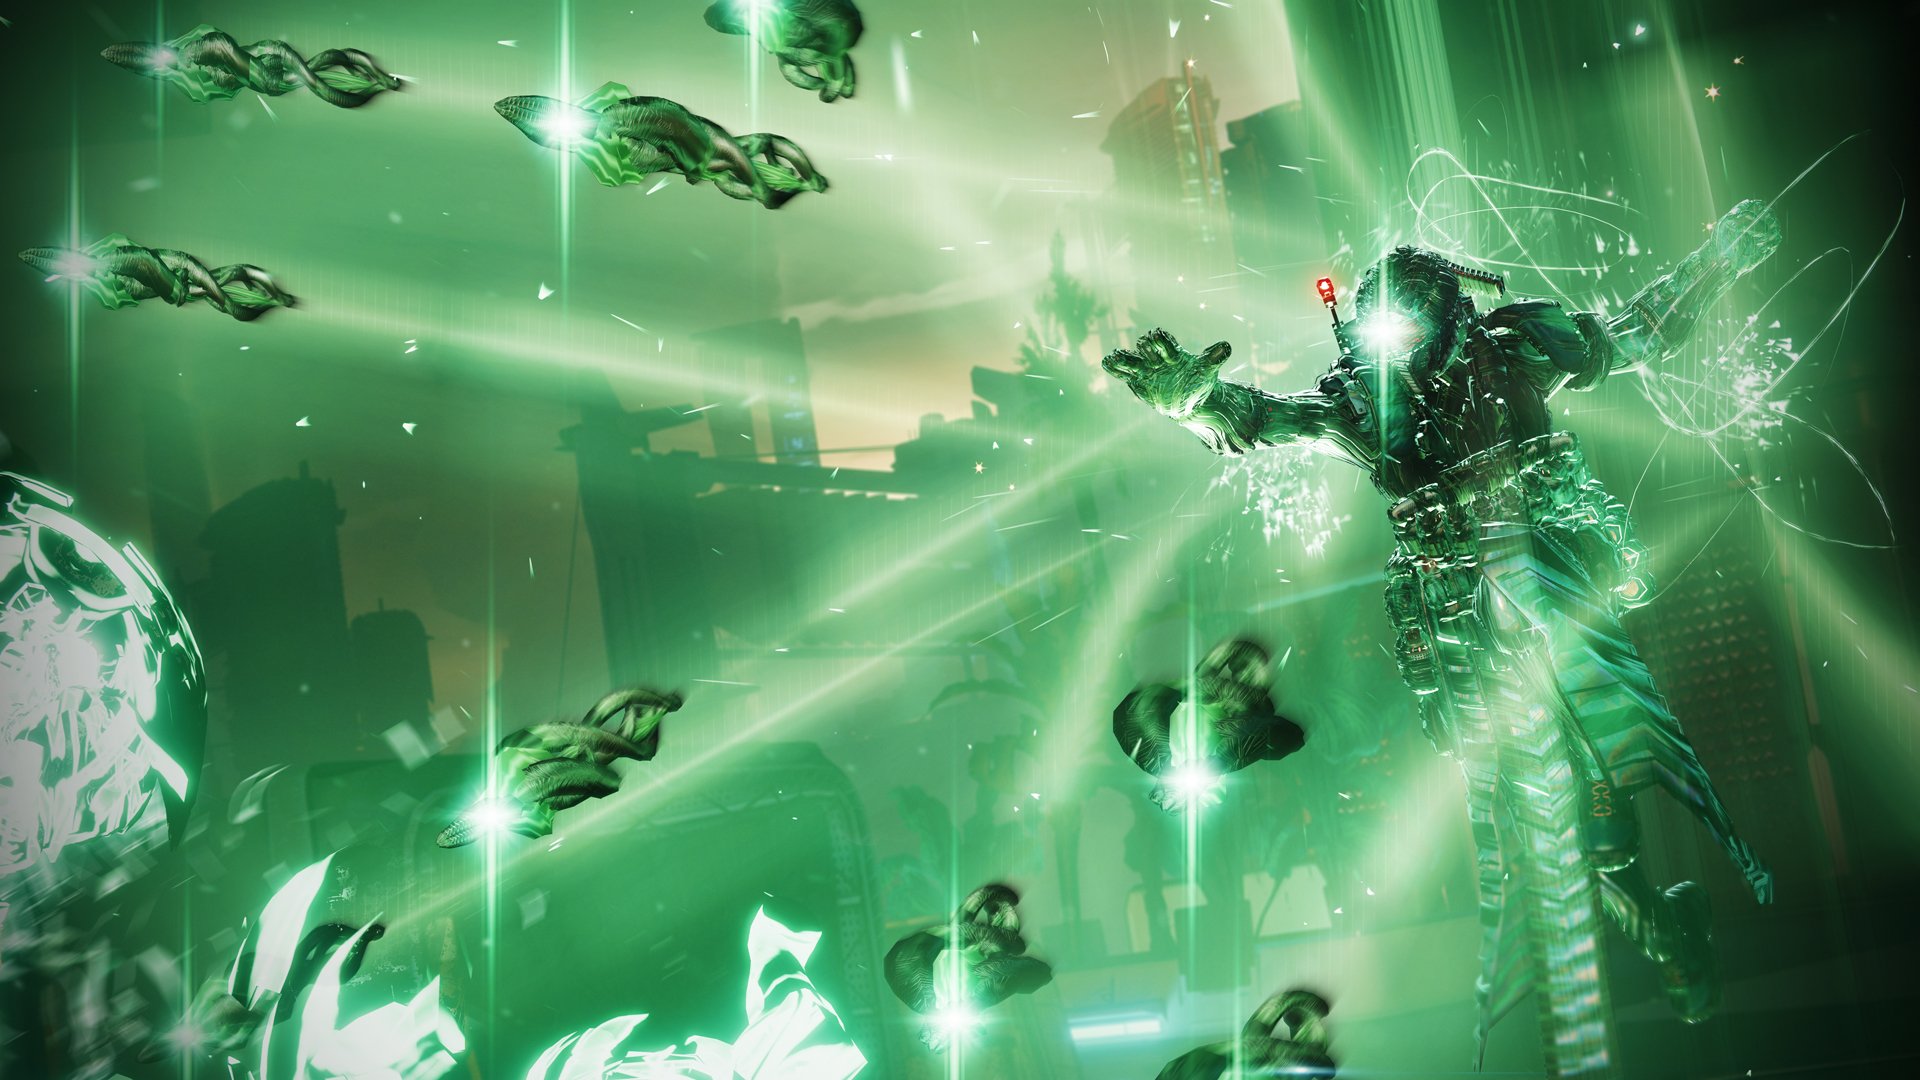 Destiny 2 Showcase introduces new Darkness subclass, Strand, coming